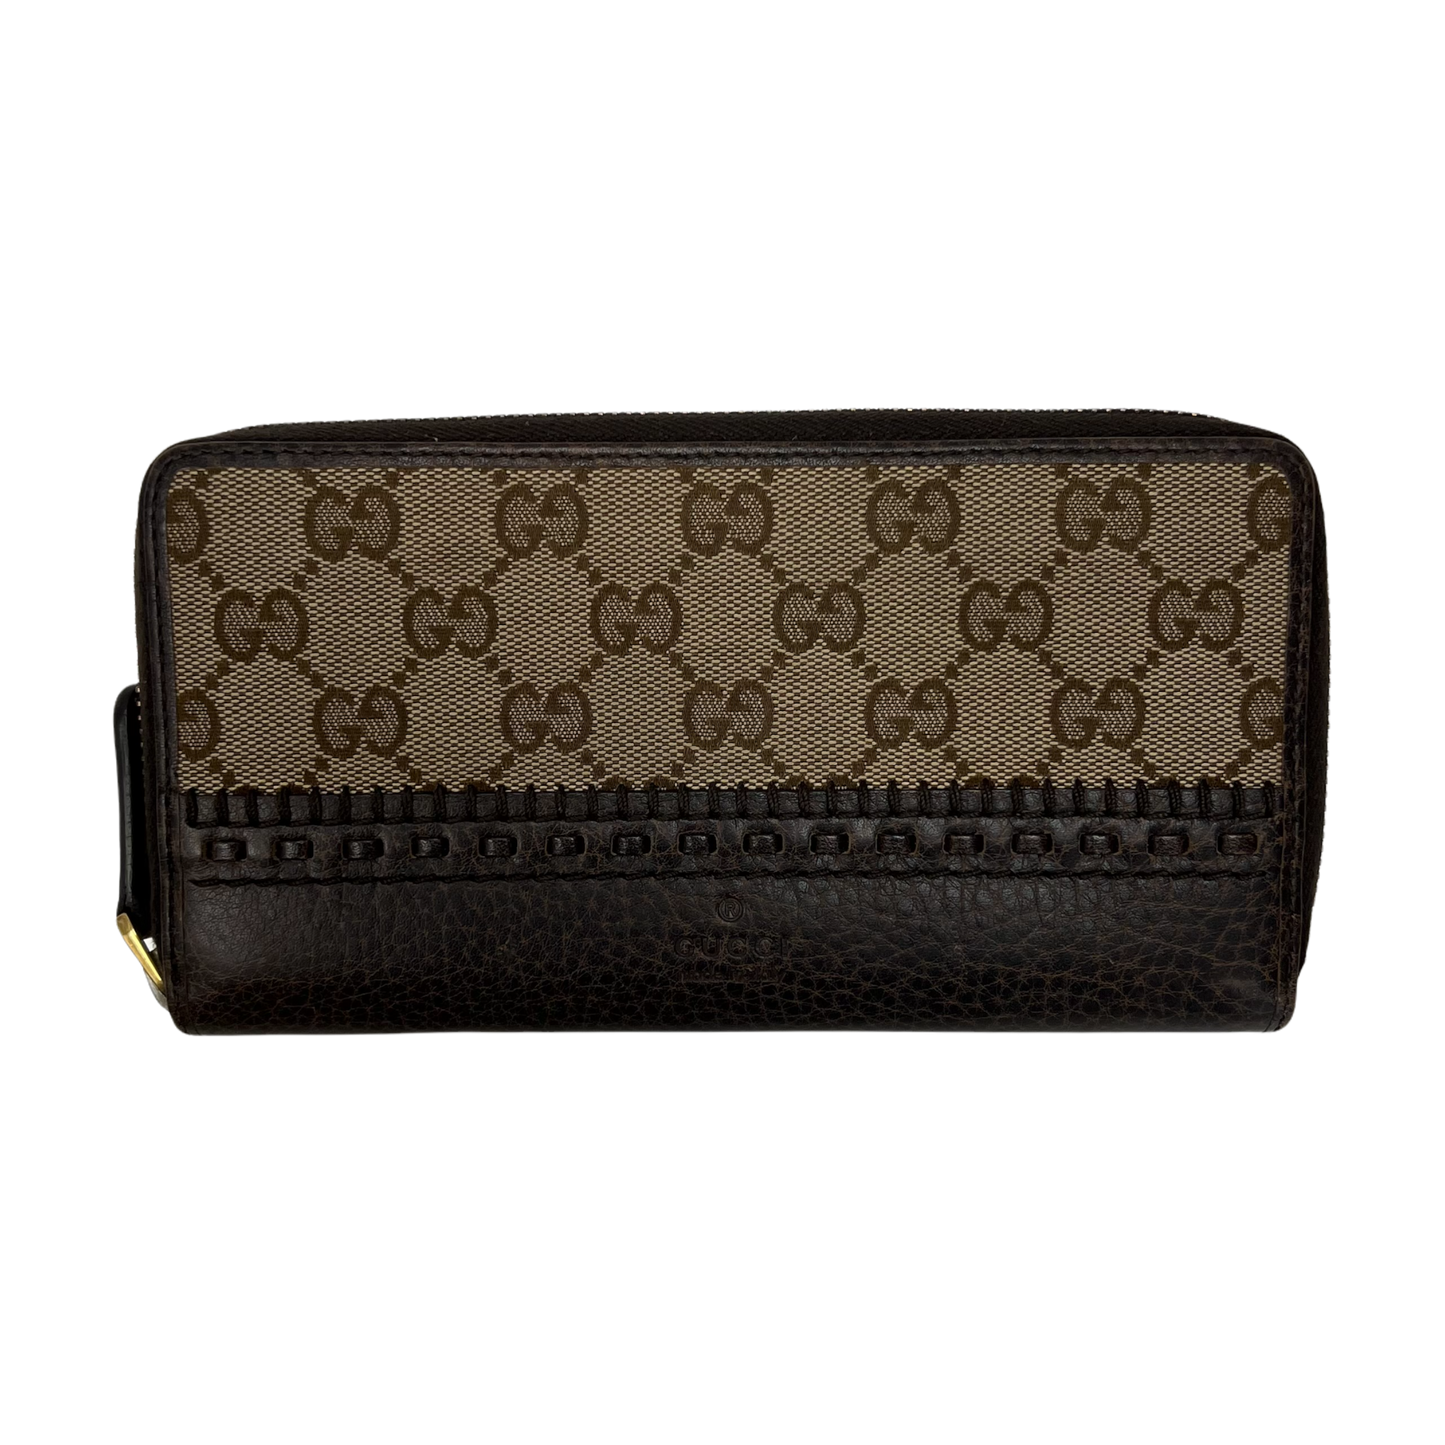 Gucci Stitched Leather Long Wallet